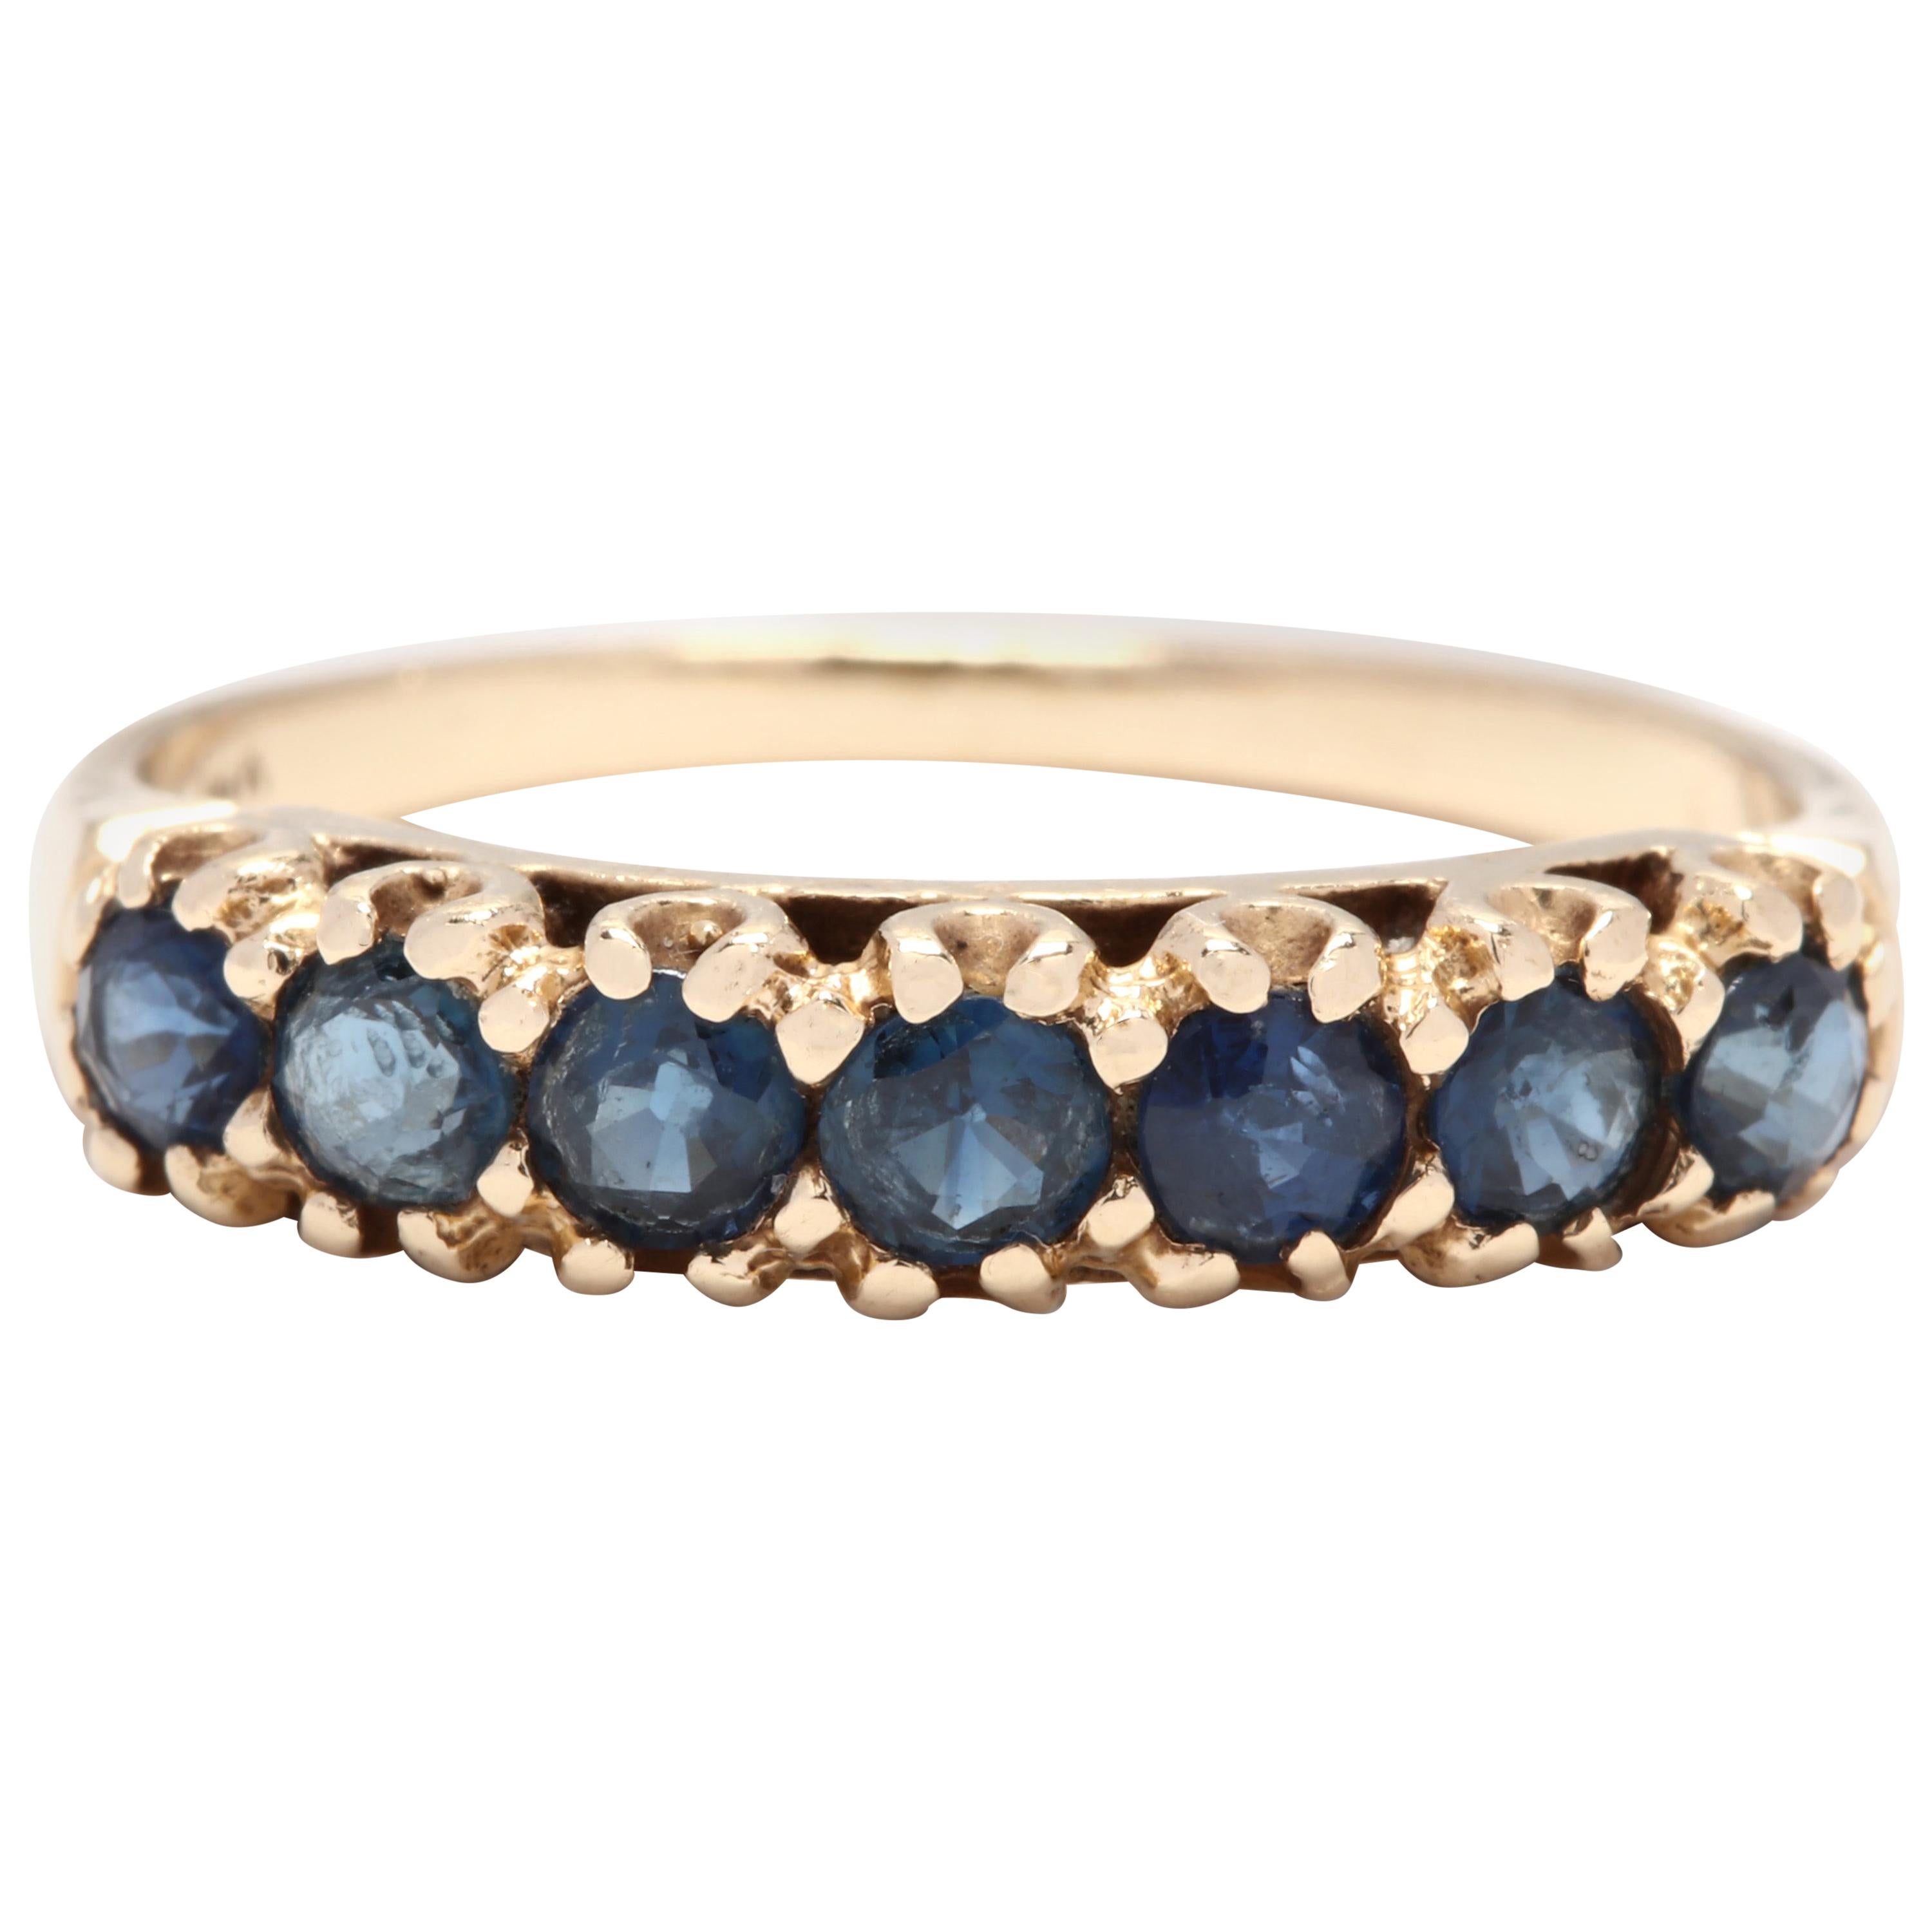 Vintage 14 Karat Yellow Gold and Sapphire Stackable Band Ring